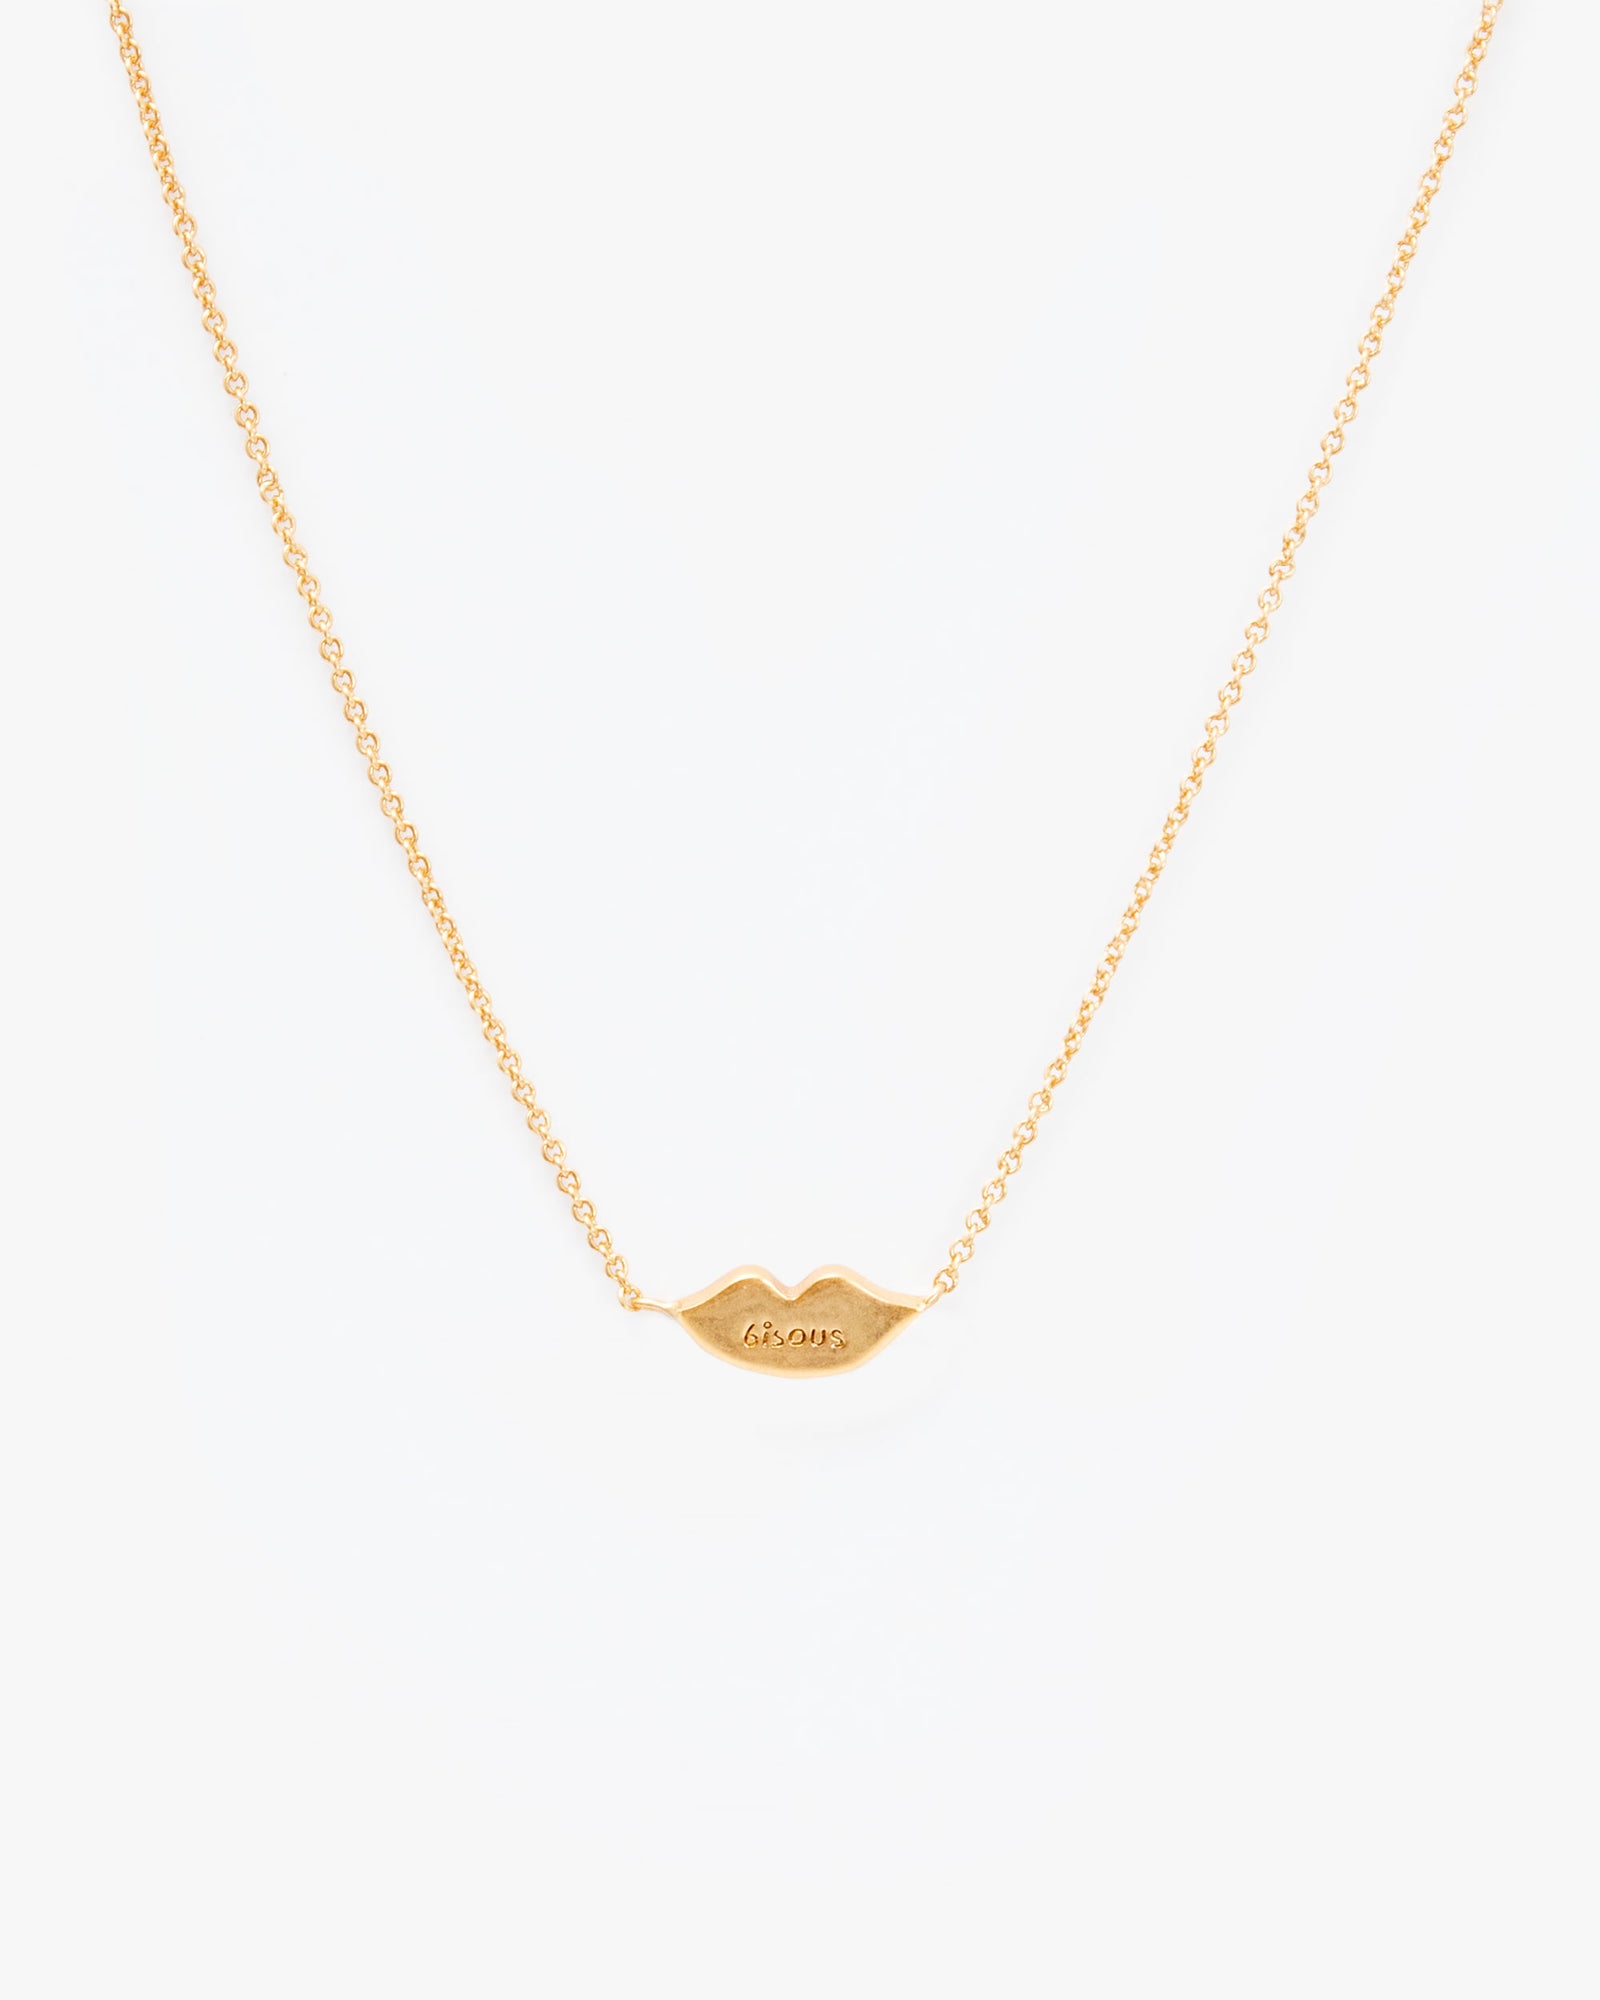 Back of the Lips Necklace